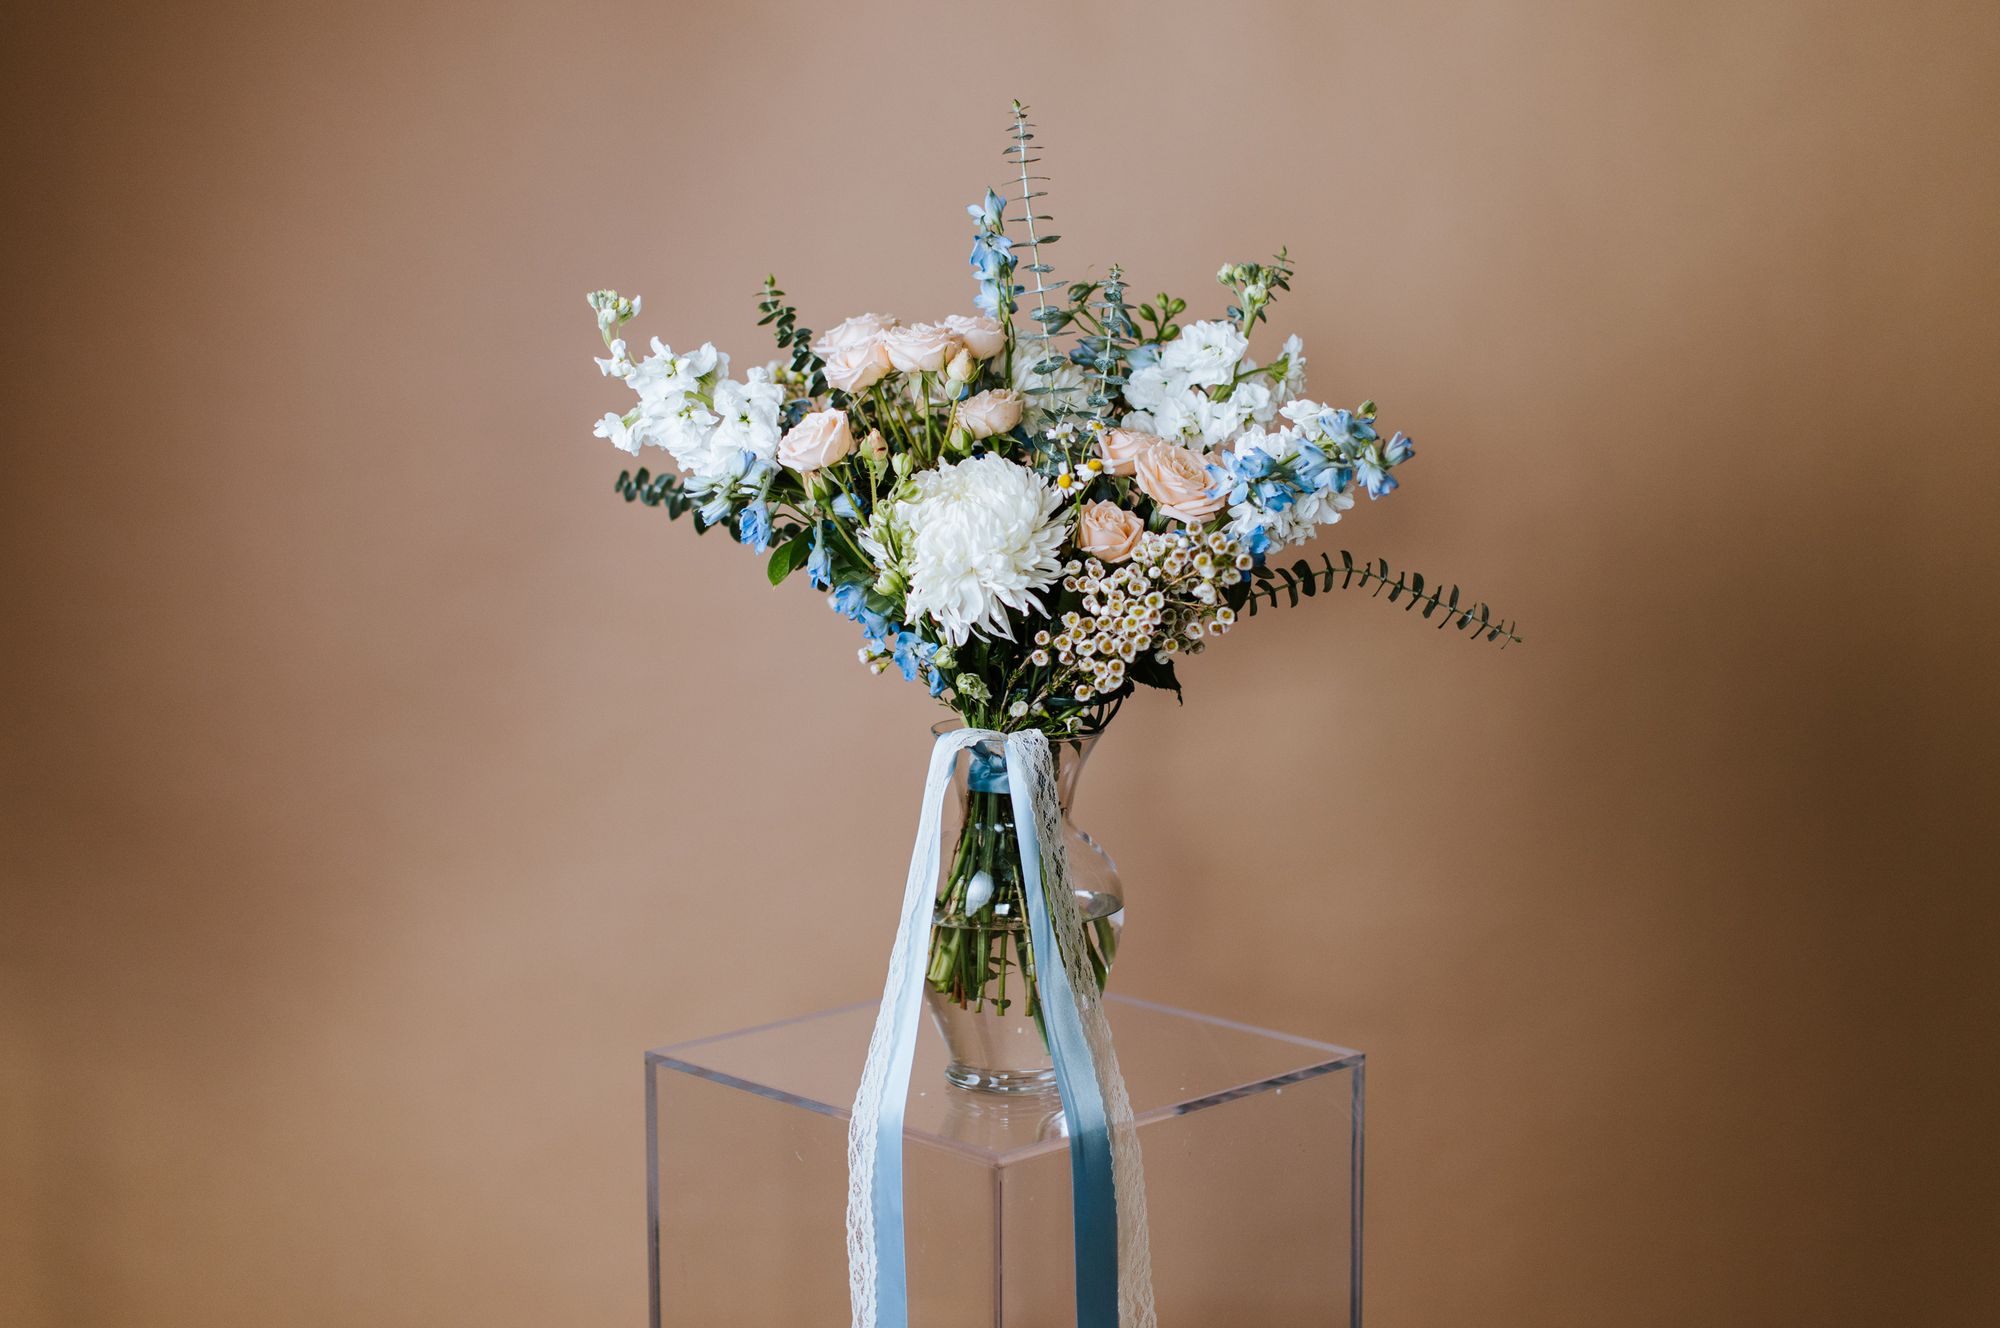 Products_Whimsical_Garden_Bride_Bouquet.jpg